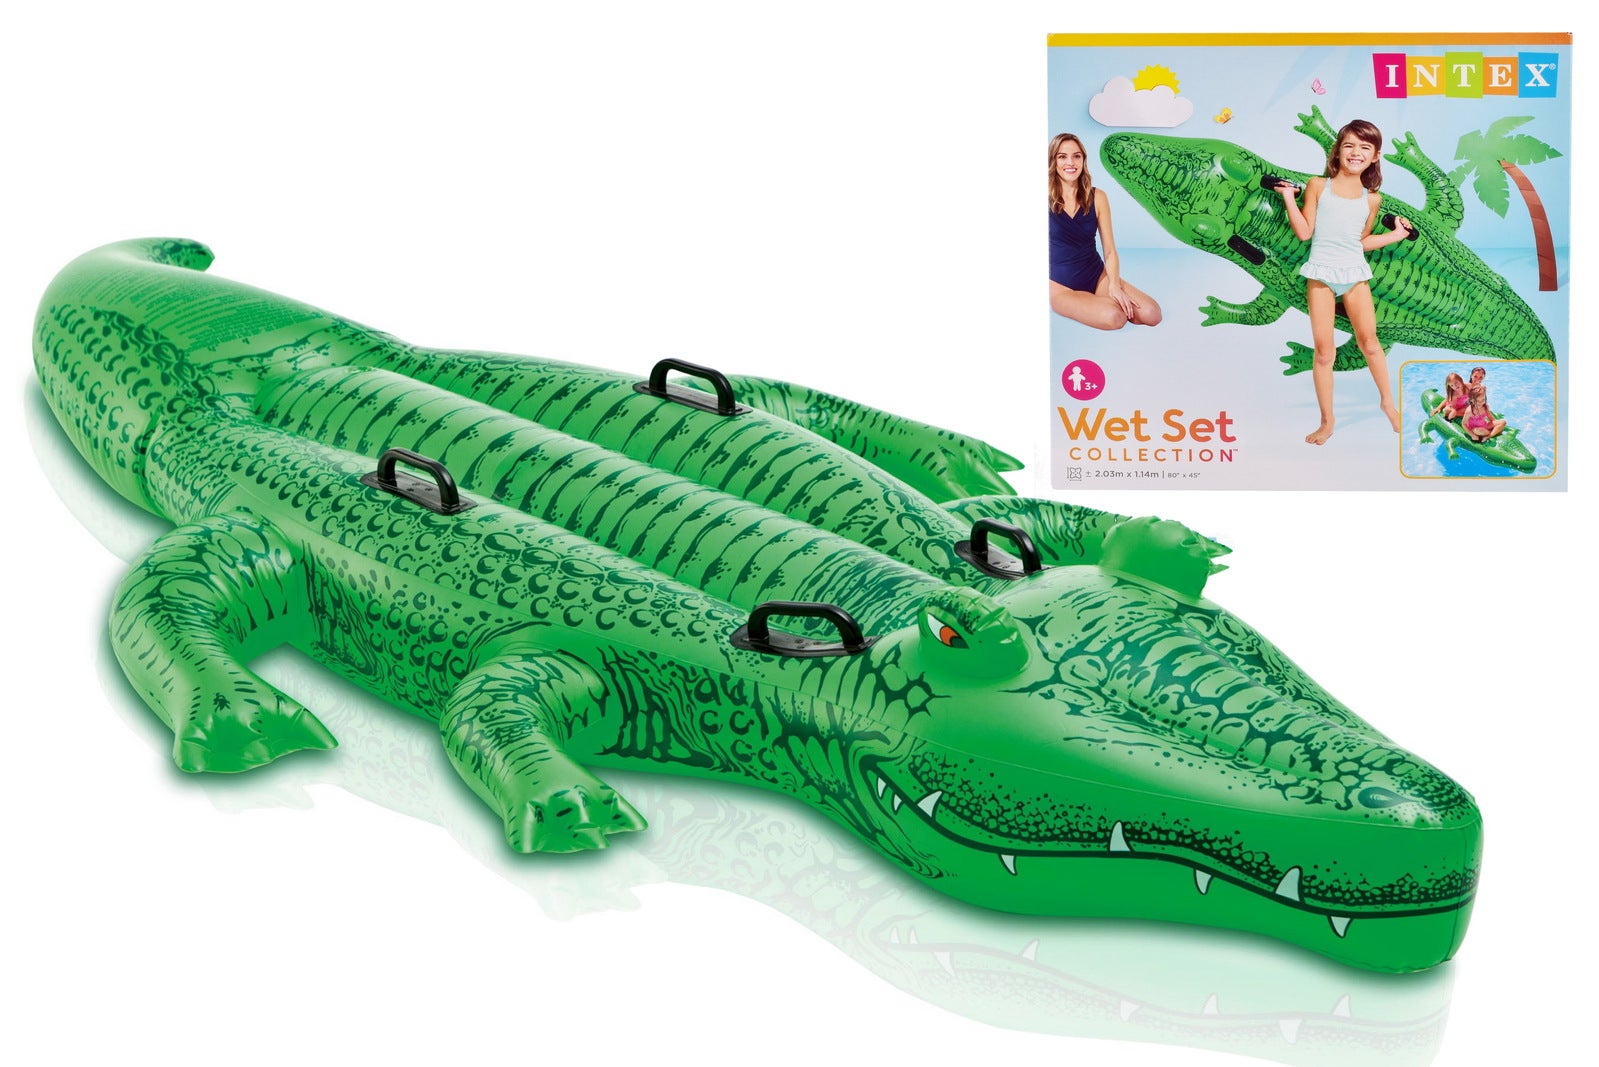 Intex Giant Gator Ride On (3 Person)